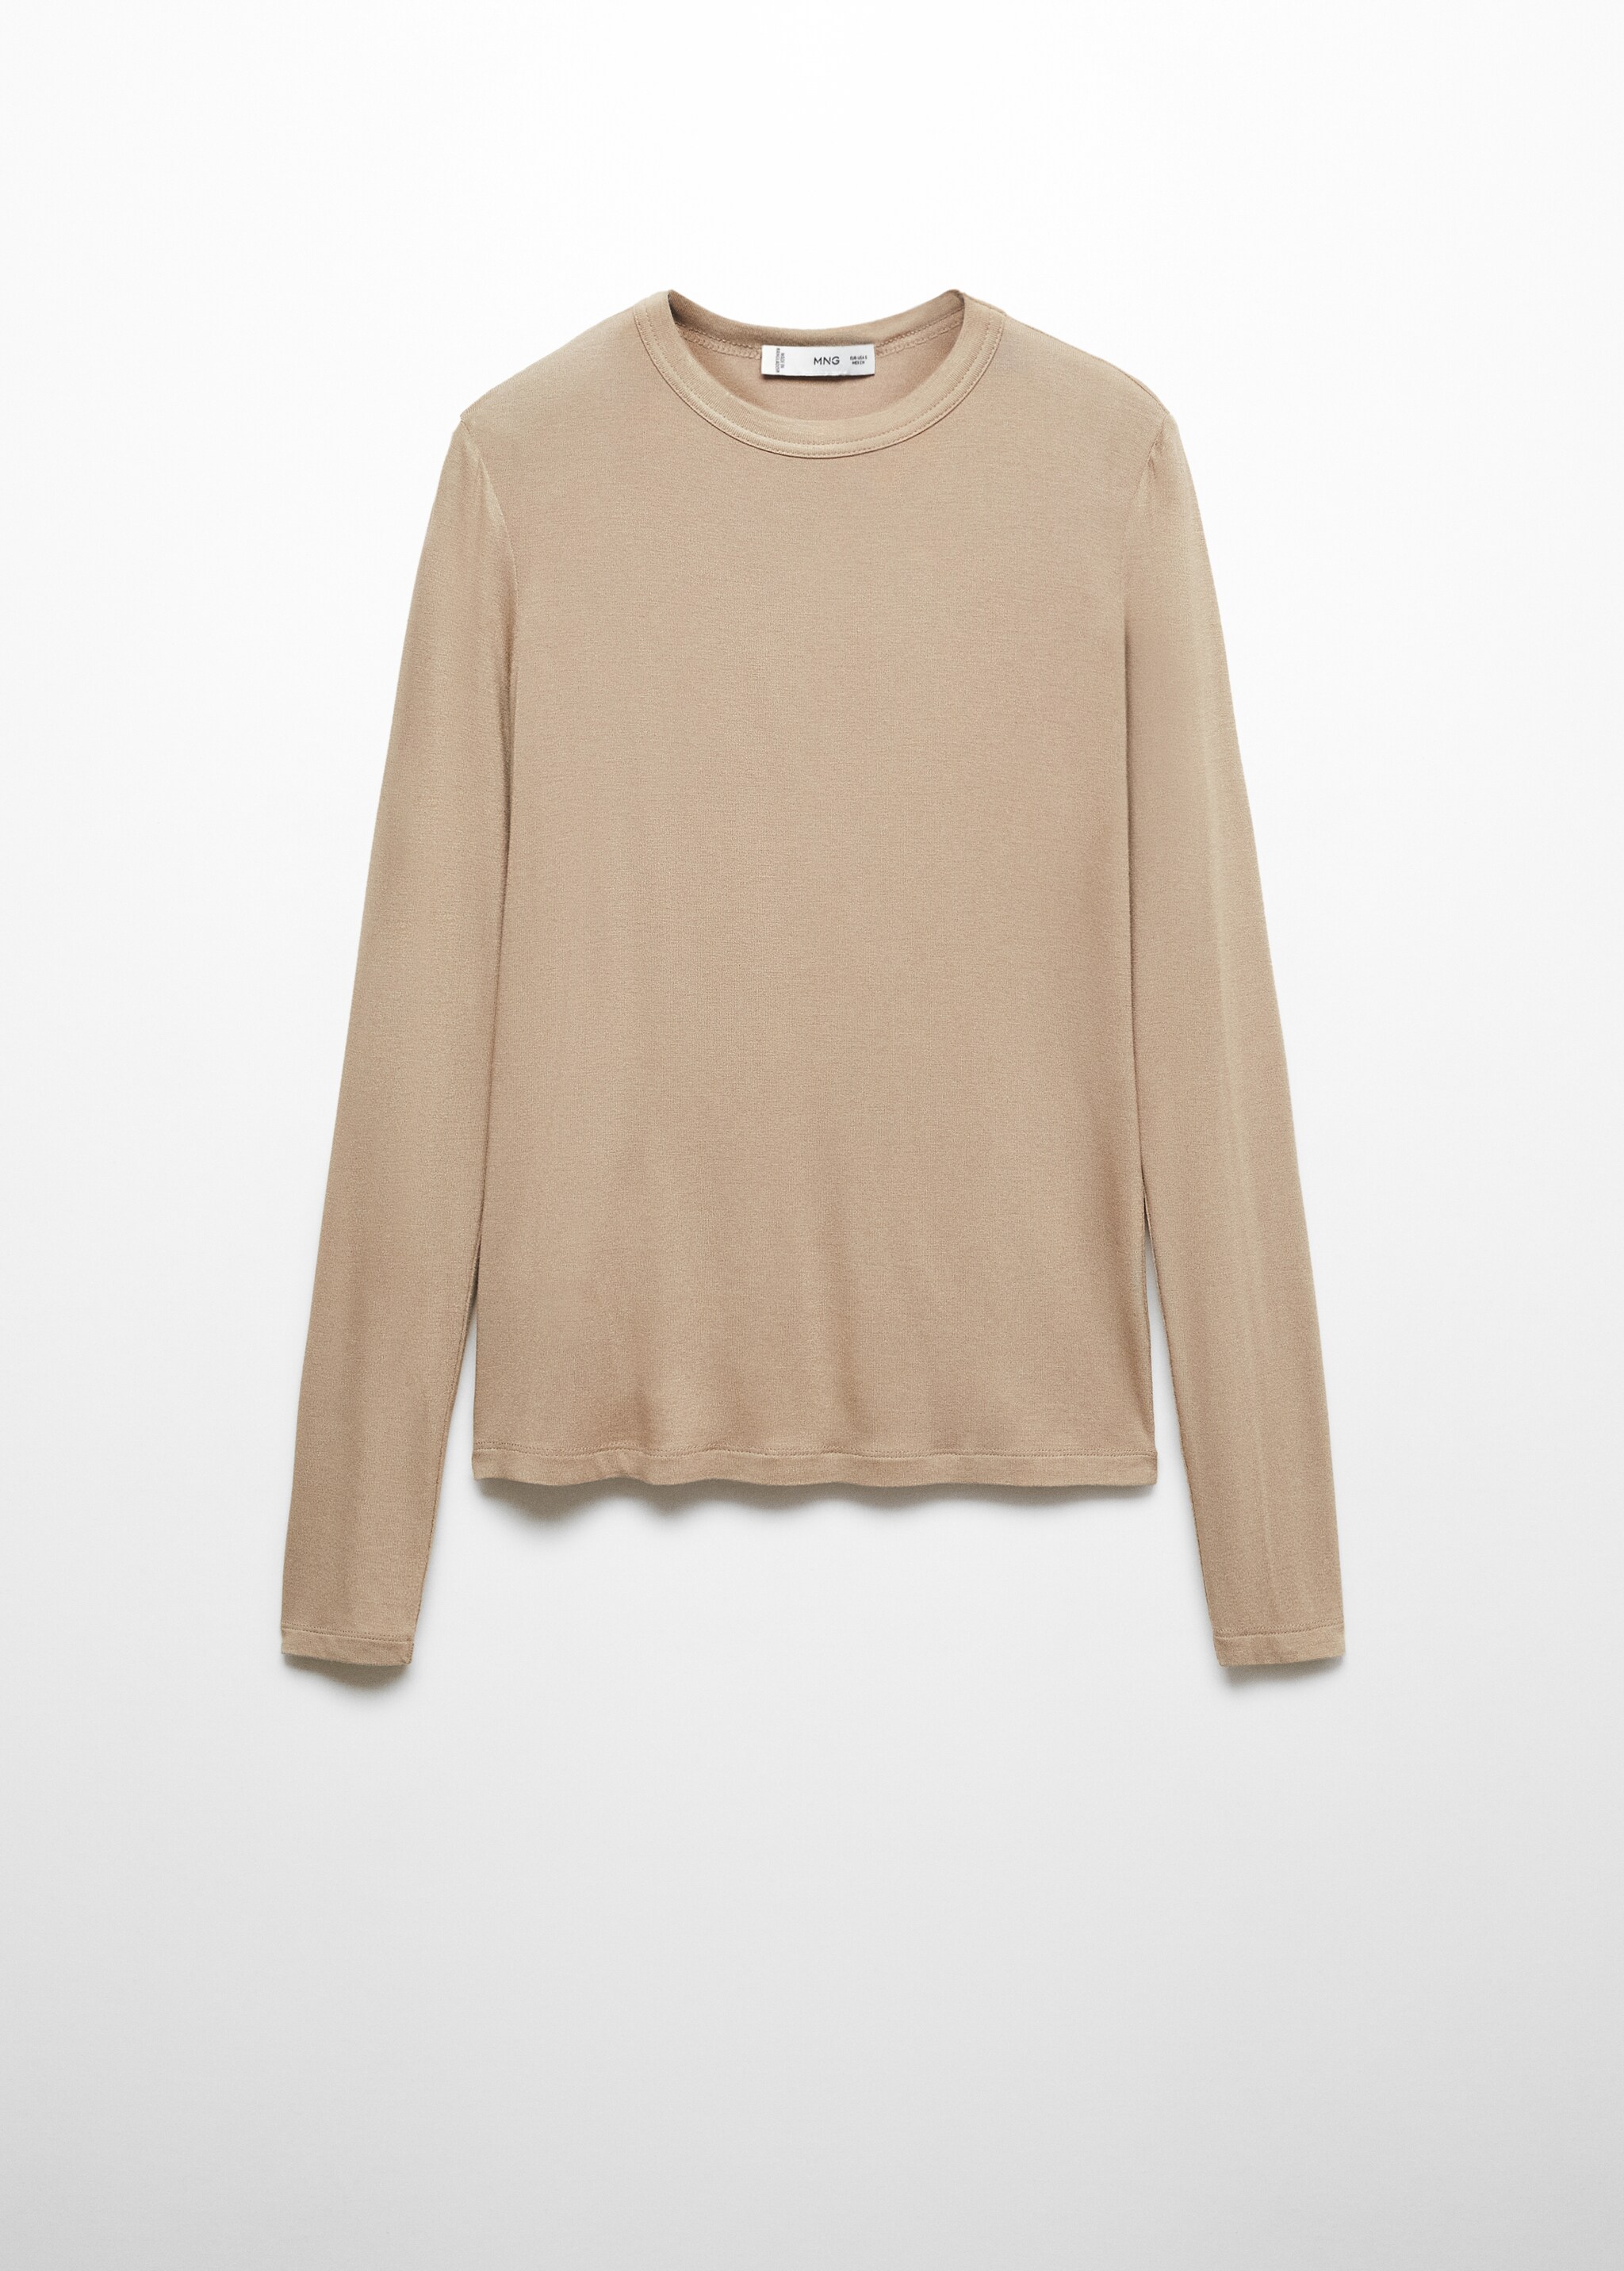 Round-neck long-sleeved t-shirt - Article without model